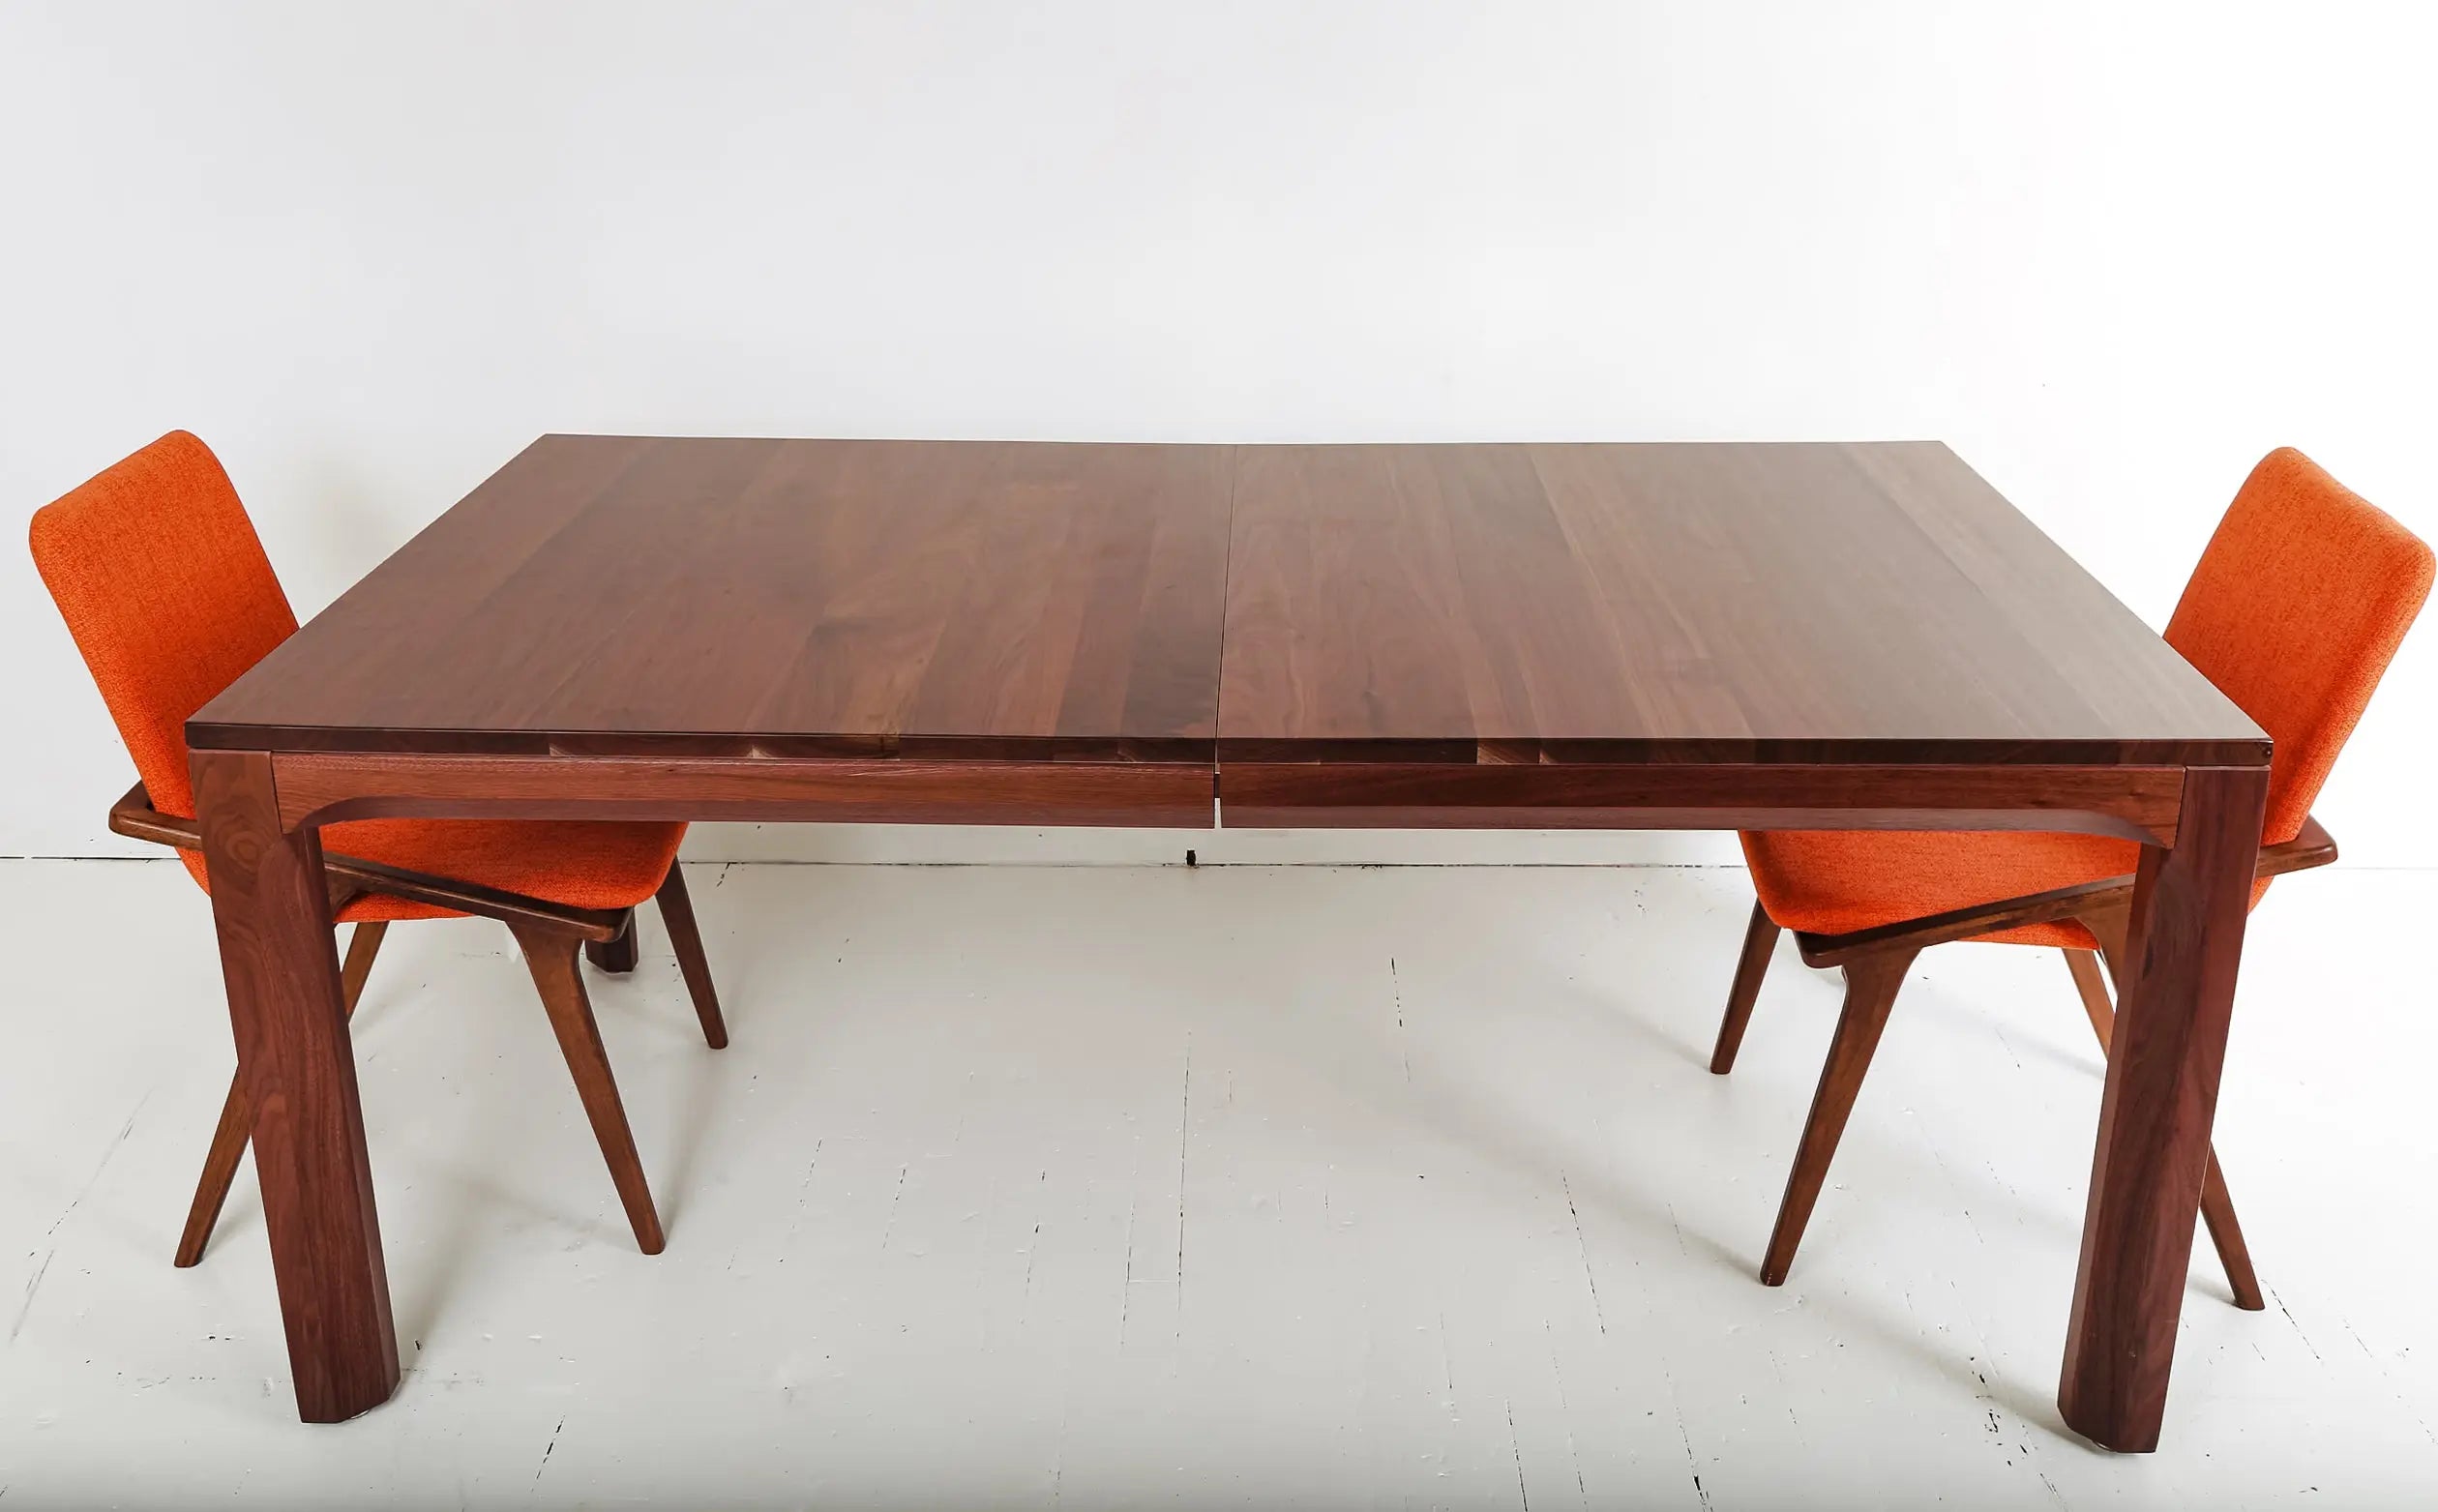 Convertible Parsons Wooden Table in Contemporary Danish Modern Style